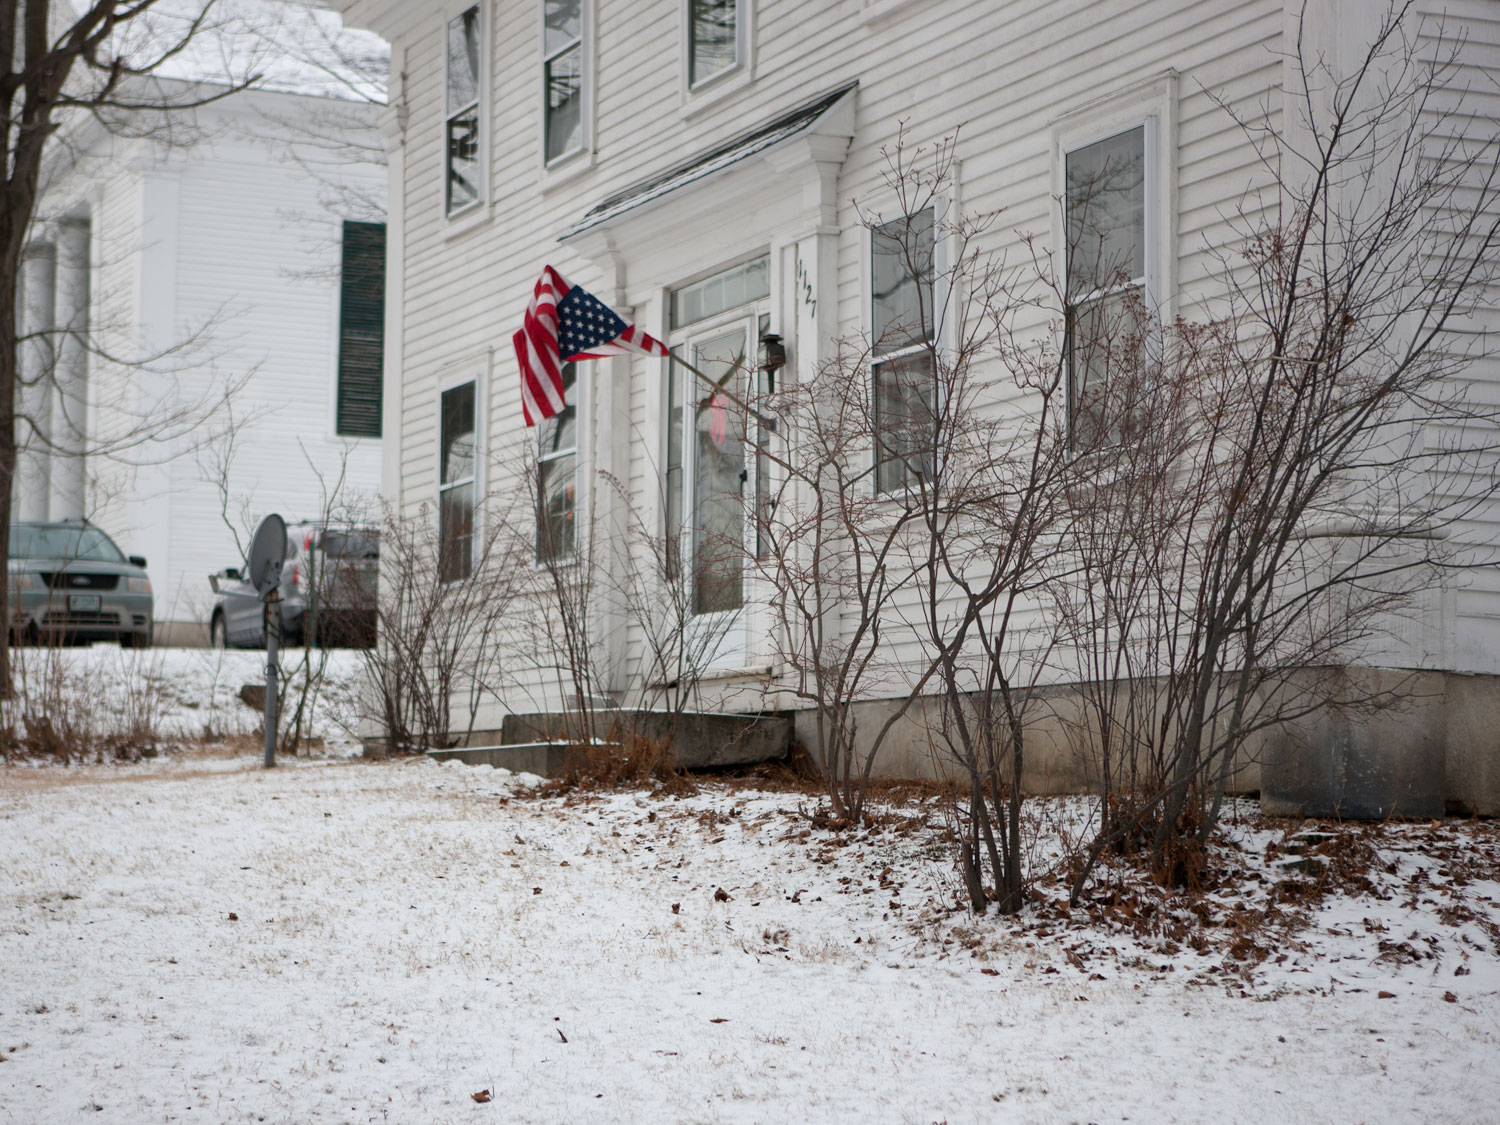 Image: A flag outside of a home in Keene, N.H days before the primary elections. Jan. 6, 2012.